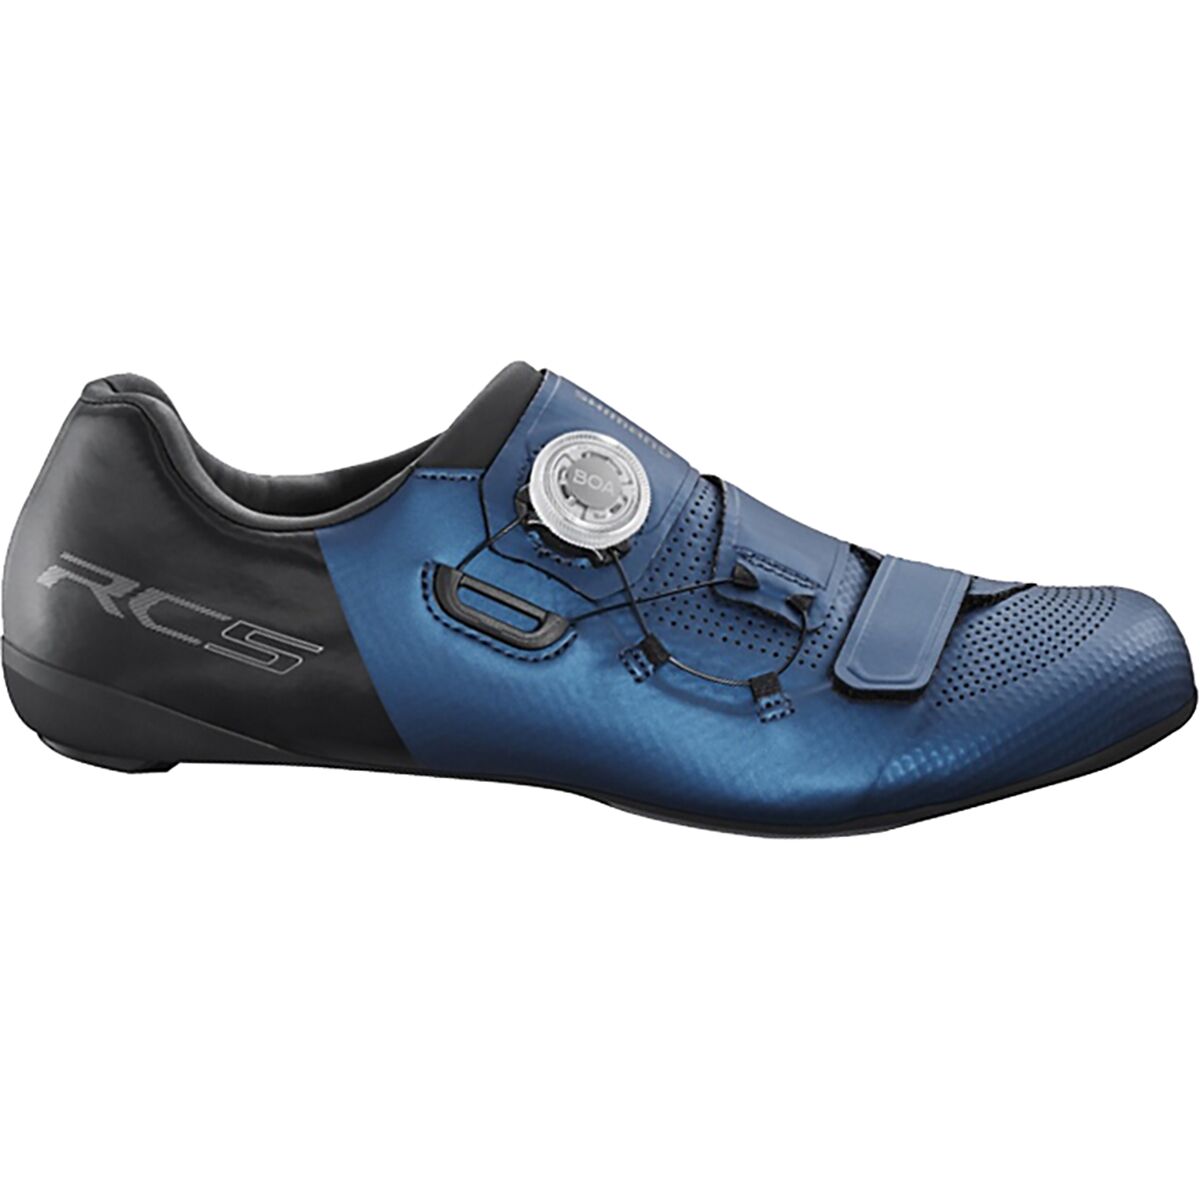 Shimano RC502 Limited Edition Cycling Shoe - Men's Blue 41.0